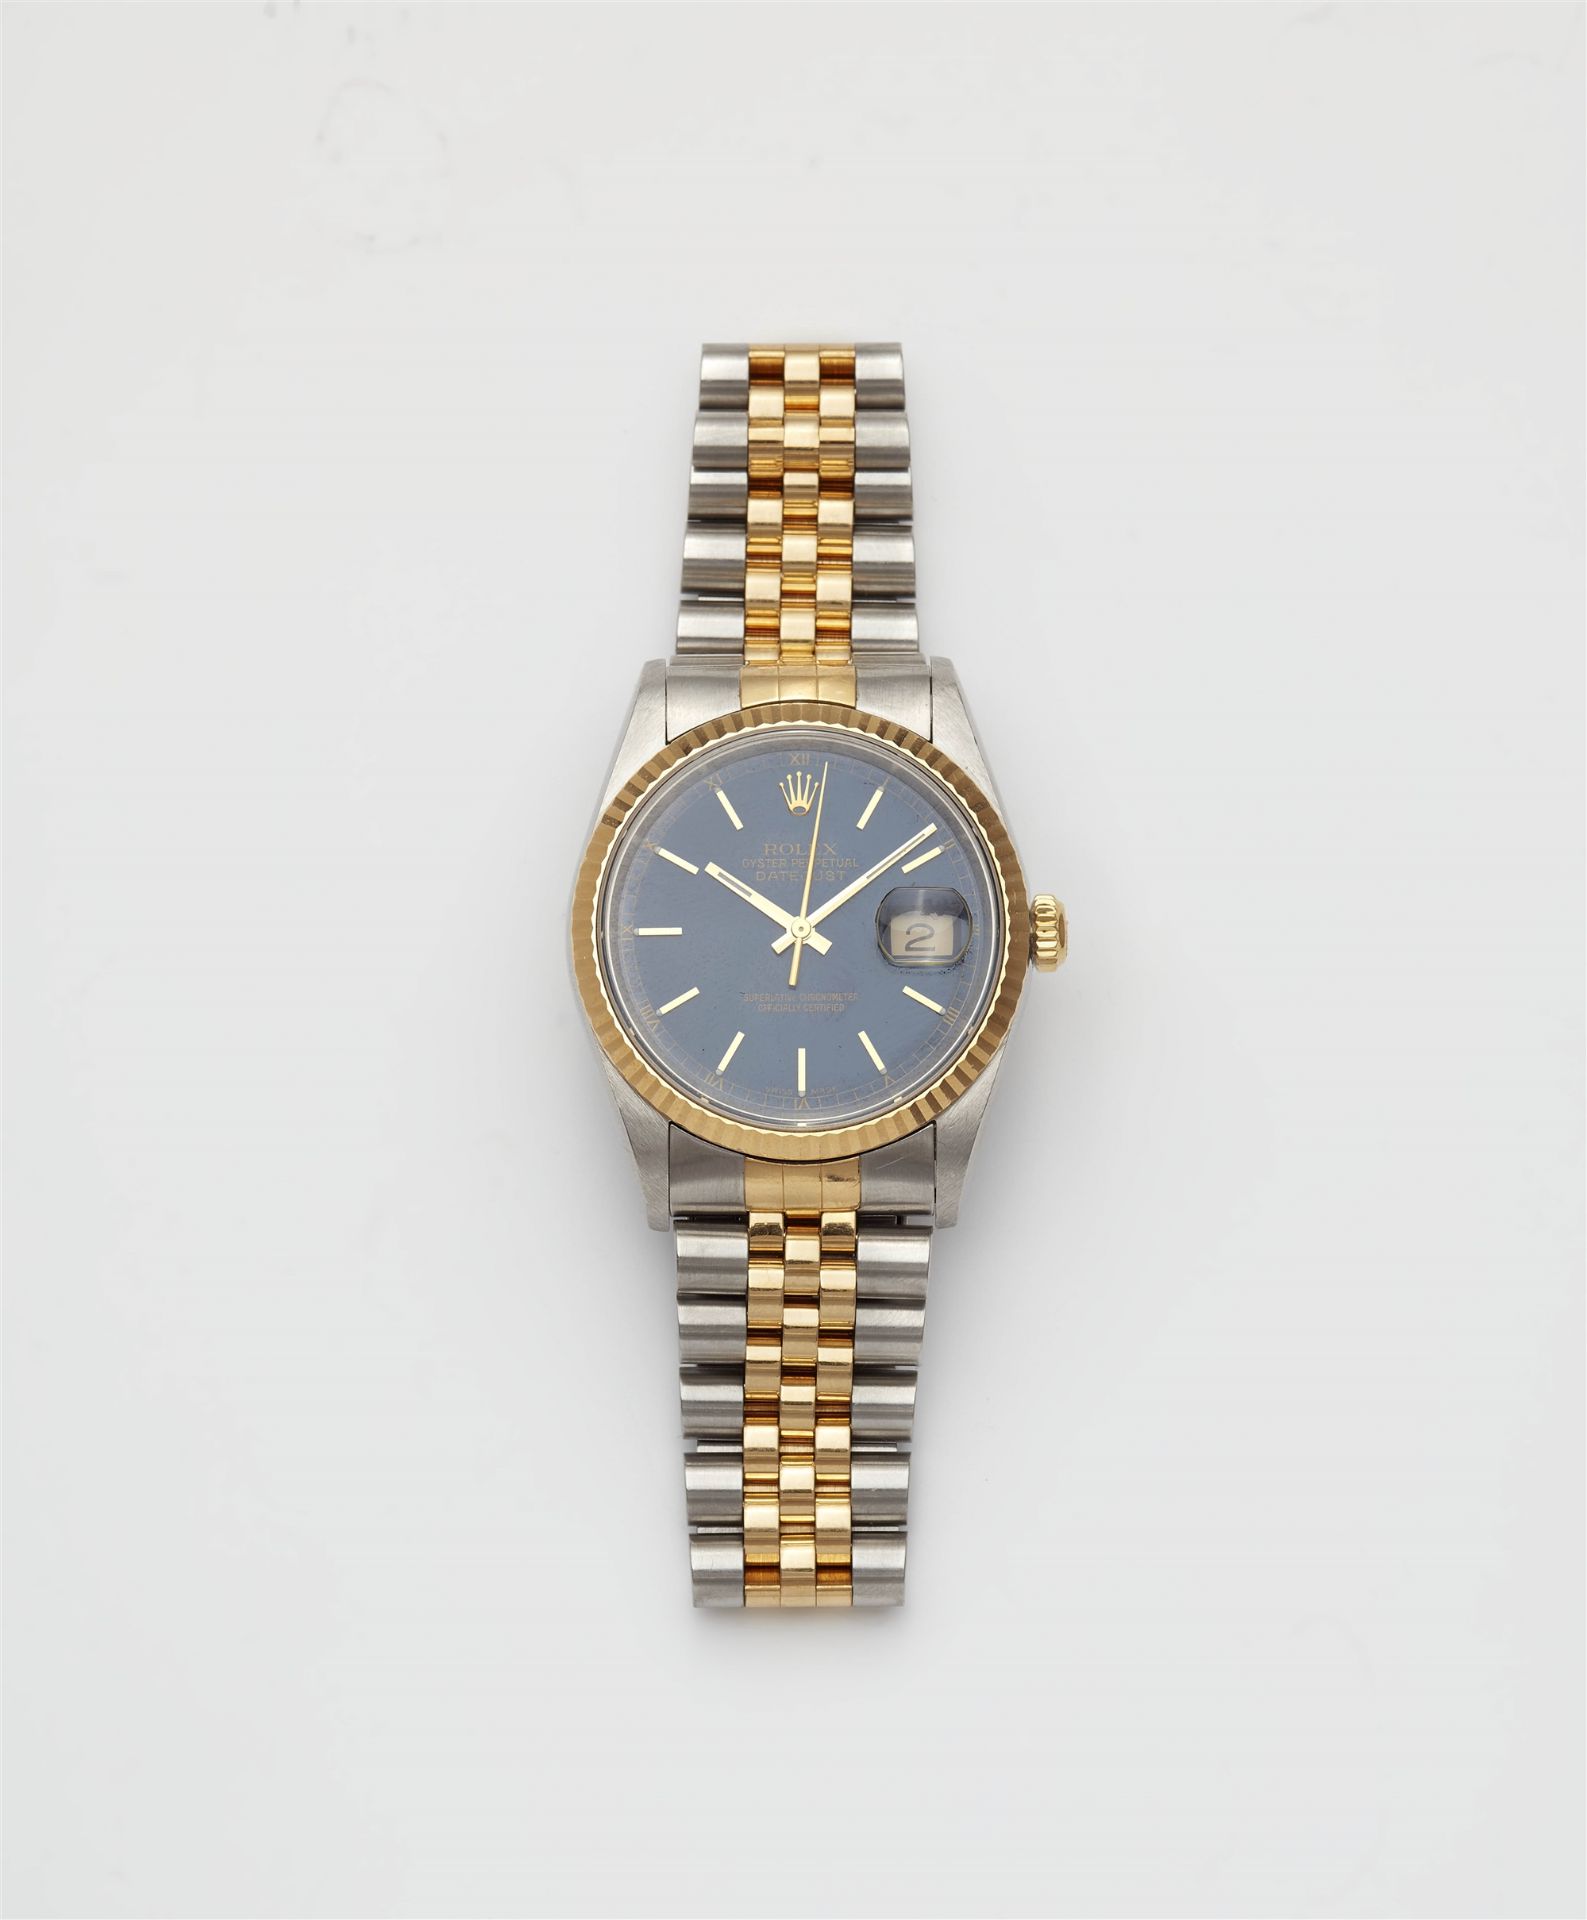 An 18k yellow gold and stainless steel automatic Rolex datejust gentleman's wristwatch.